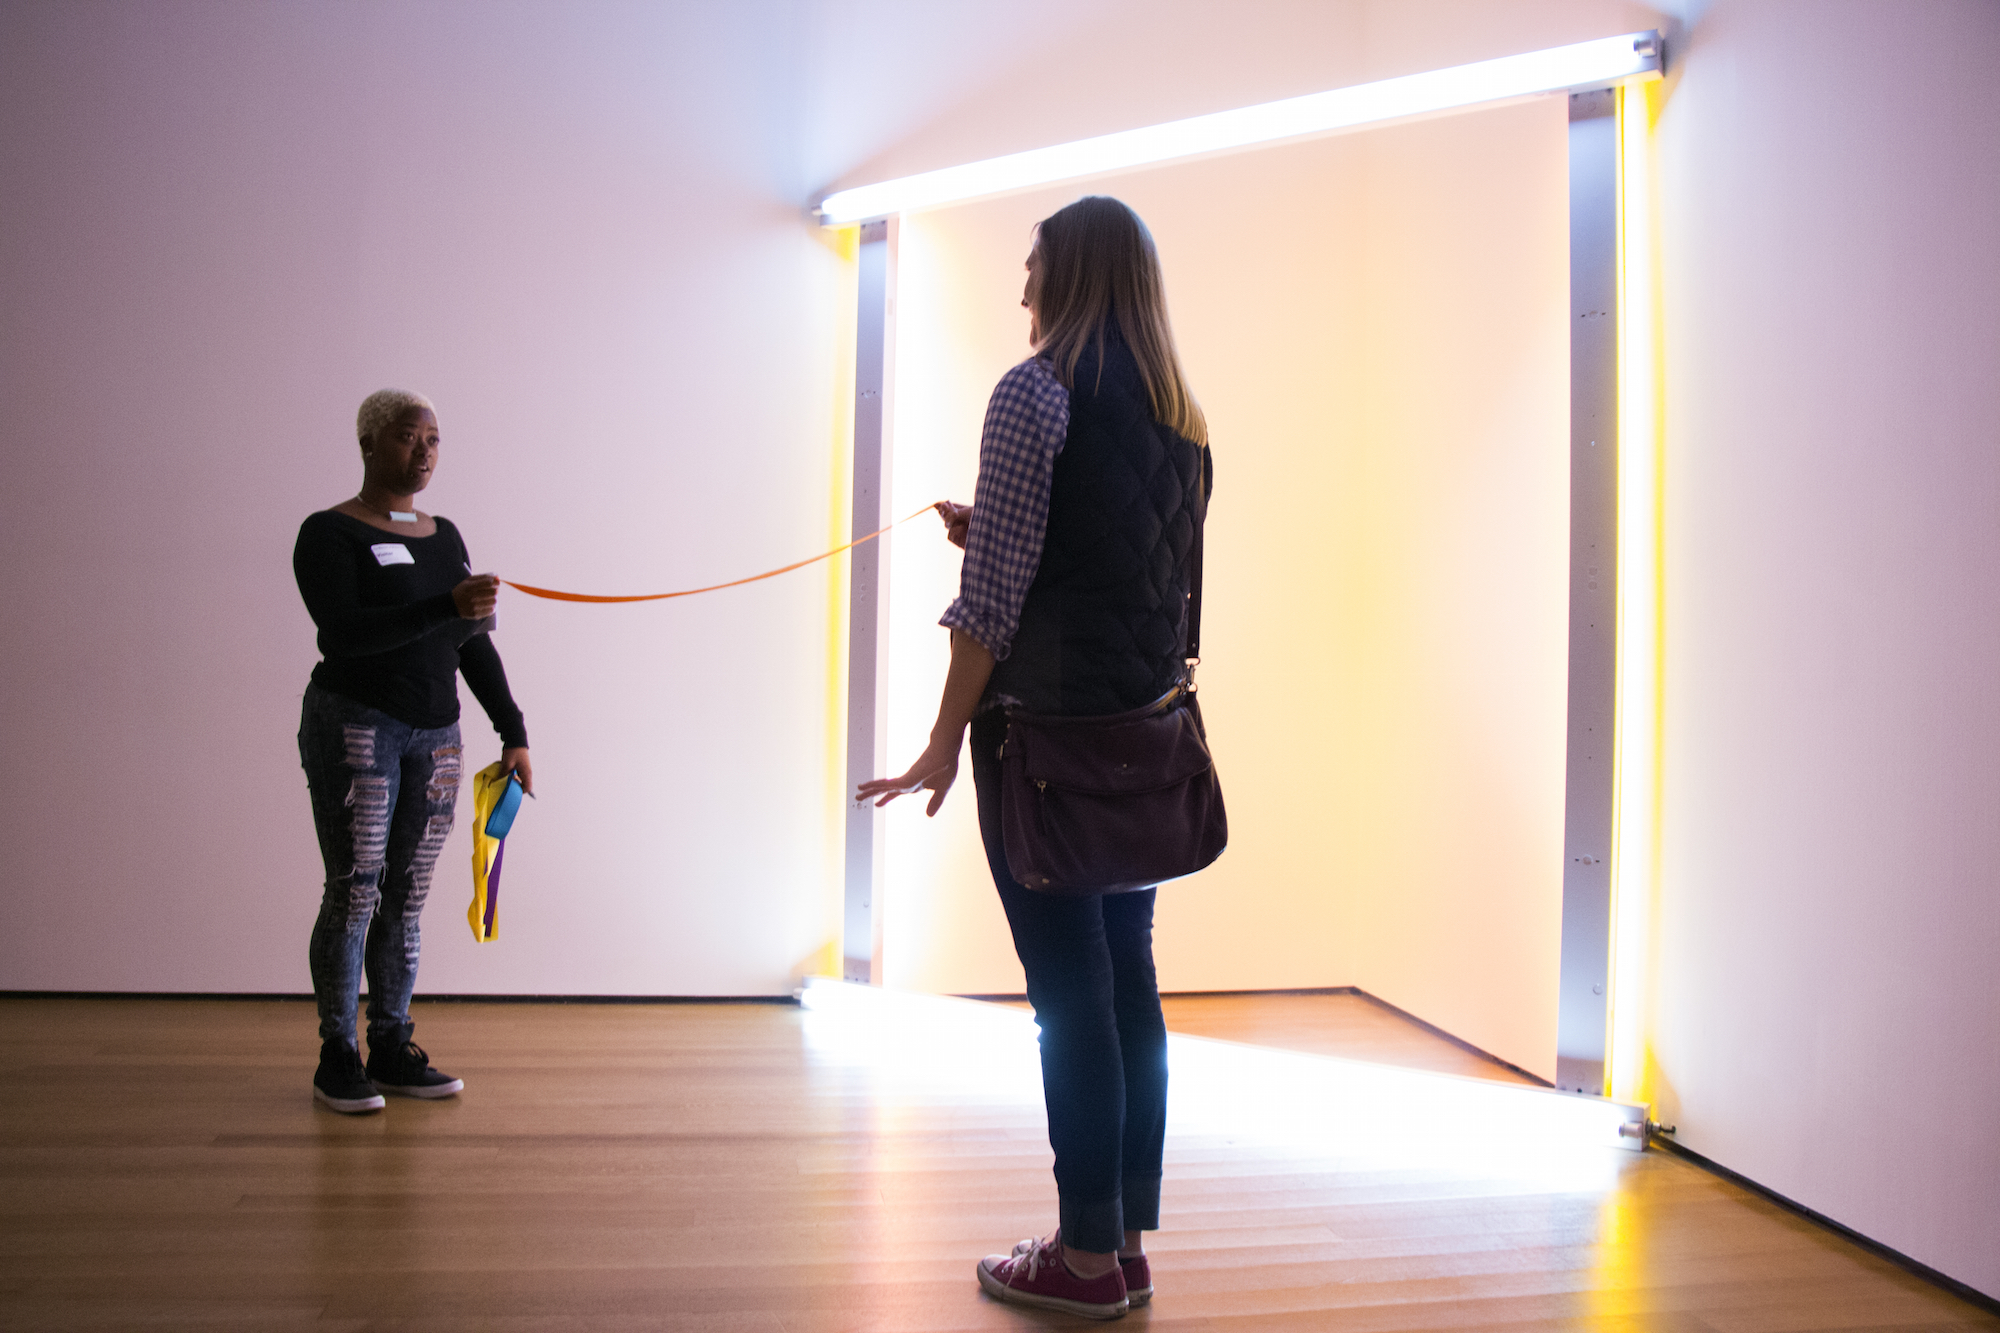 Two people stand in front of a light sculpture holding the ends of a tape measure that stretches between them.